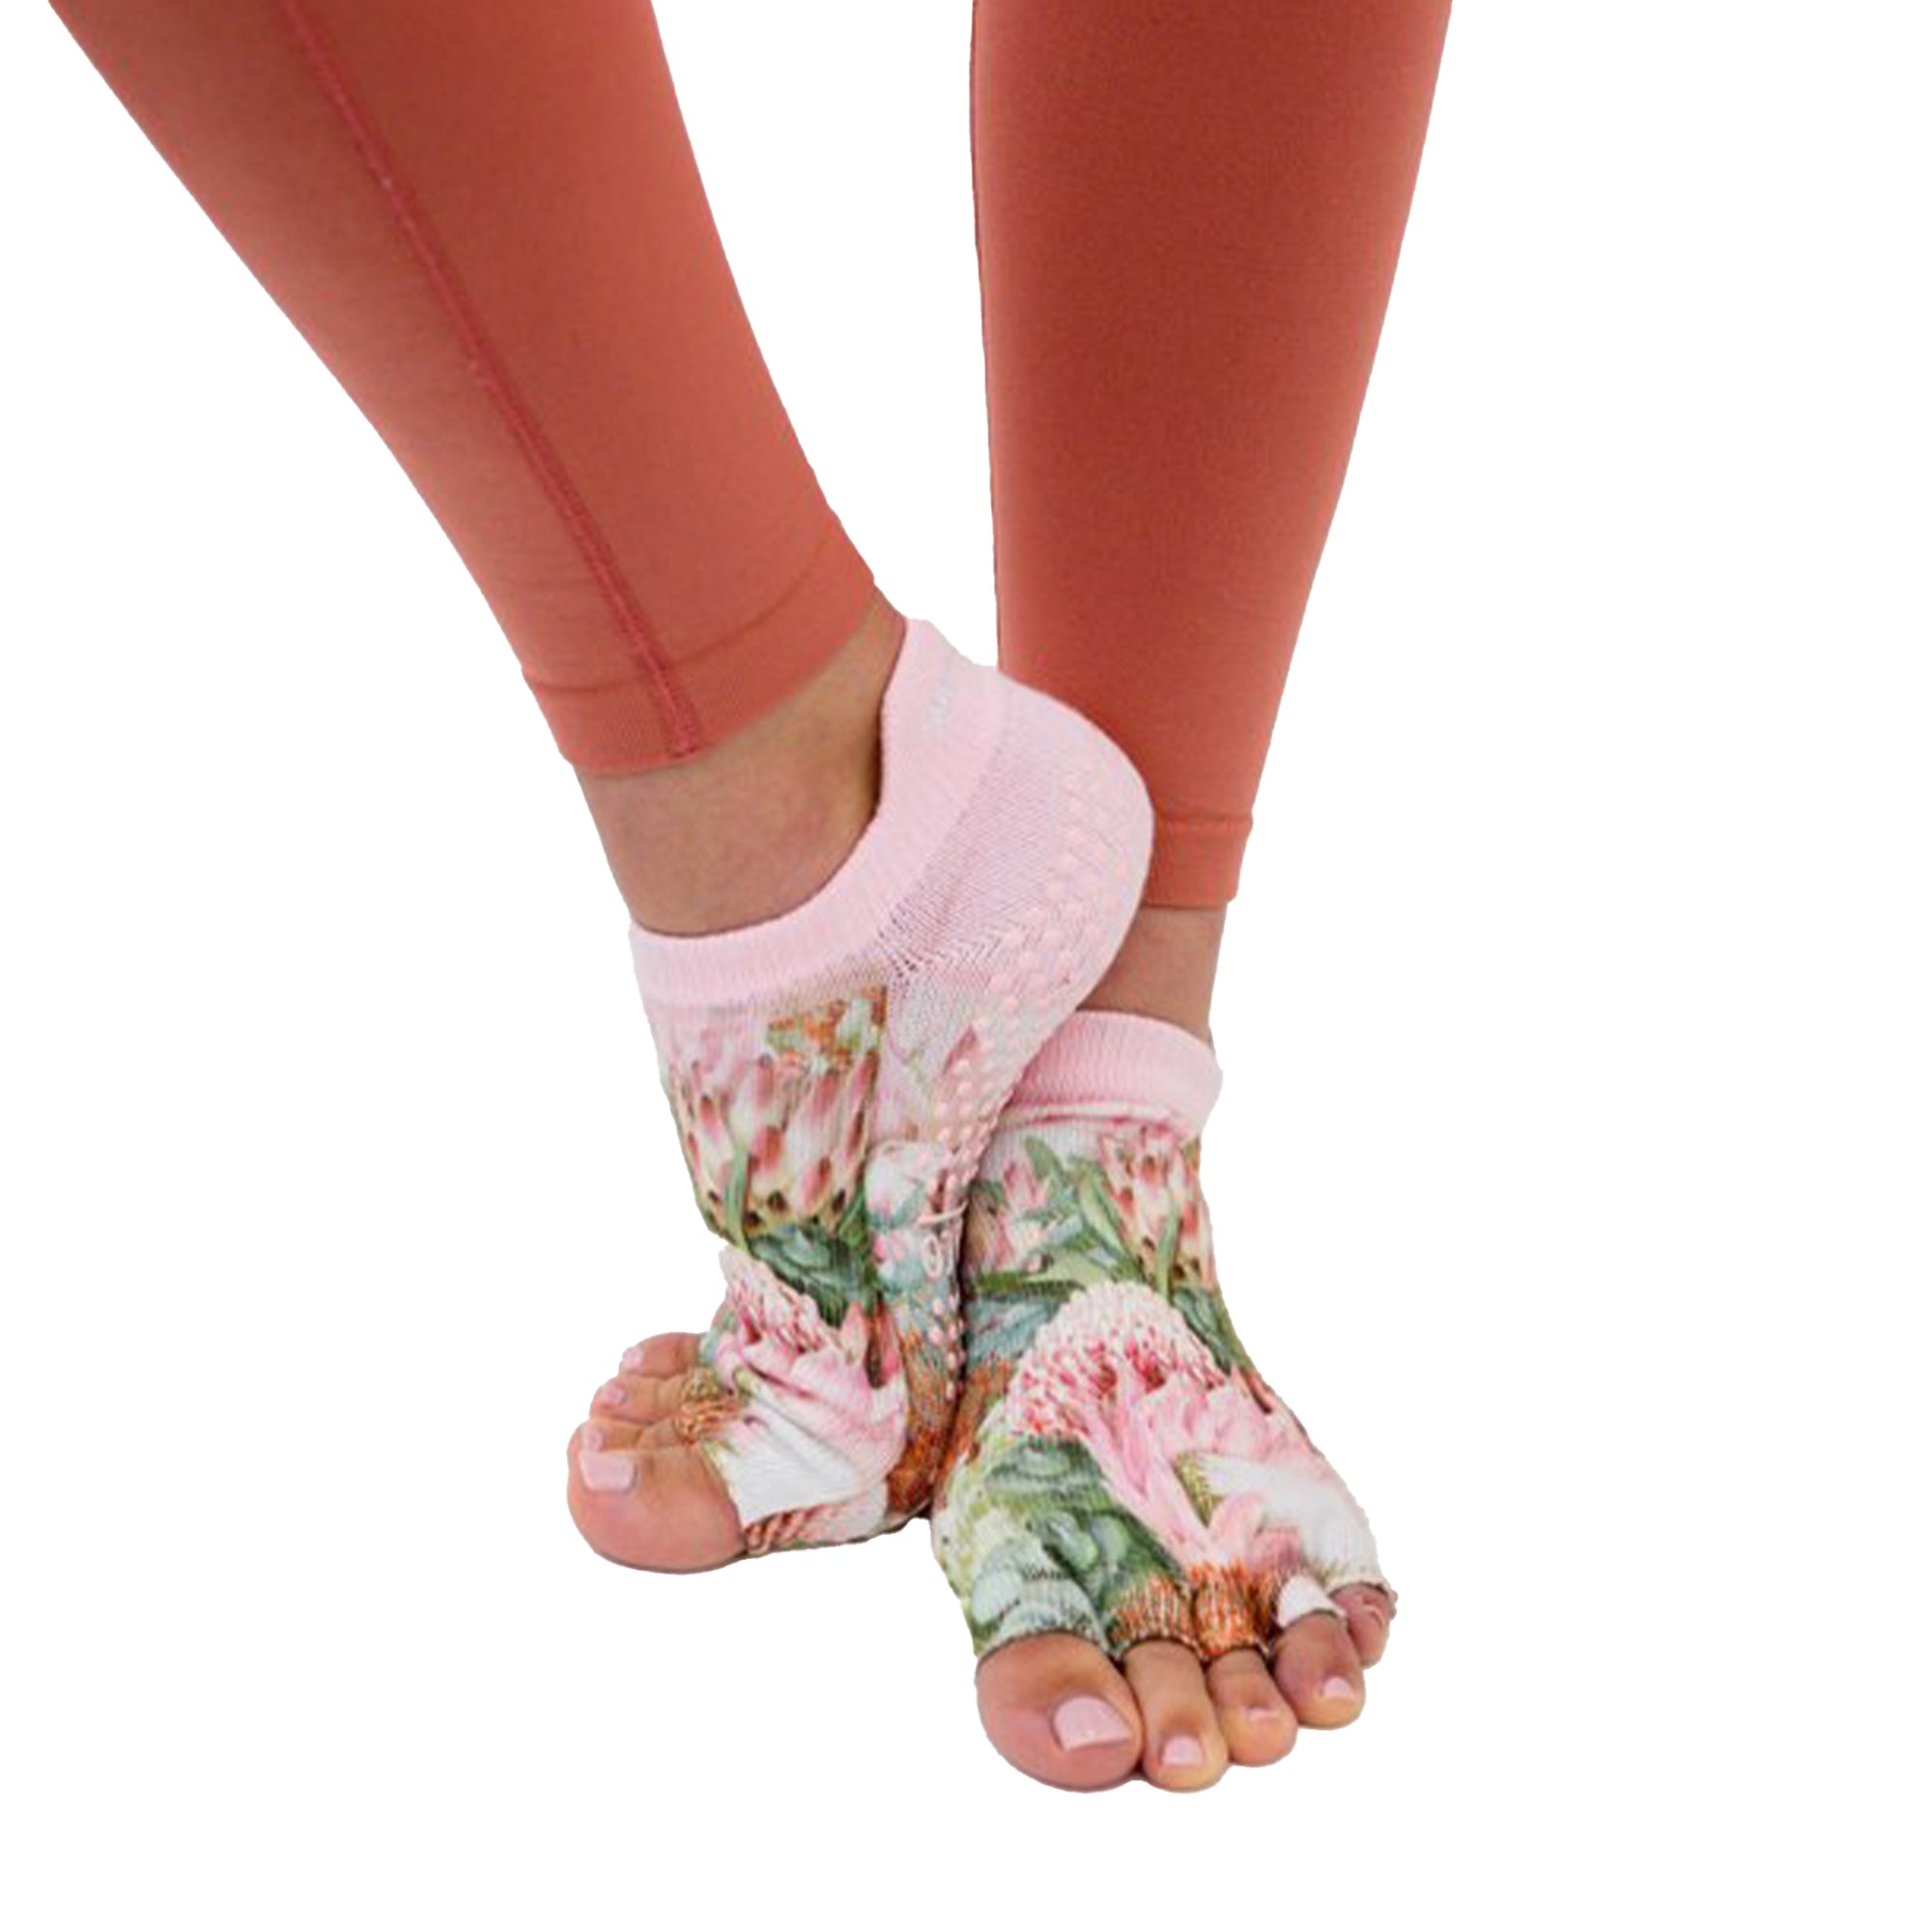 Pink Reformer Mat and Grip Socks Bundle for Pilates - SOCK IT AND CO.®